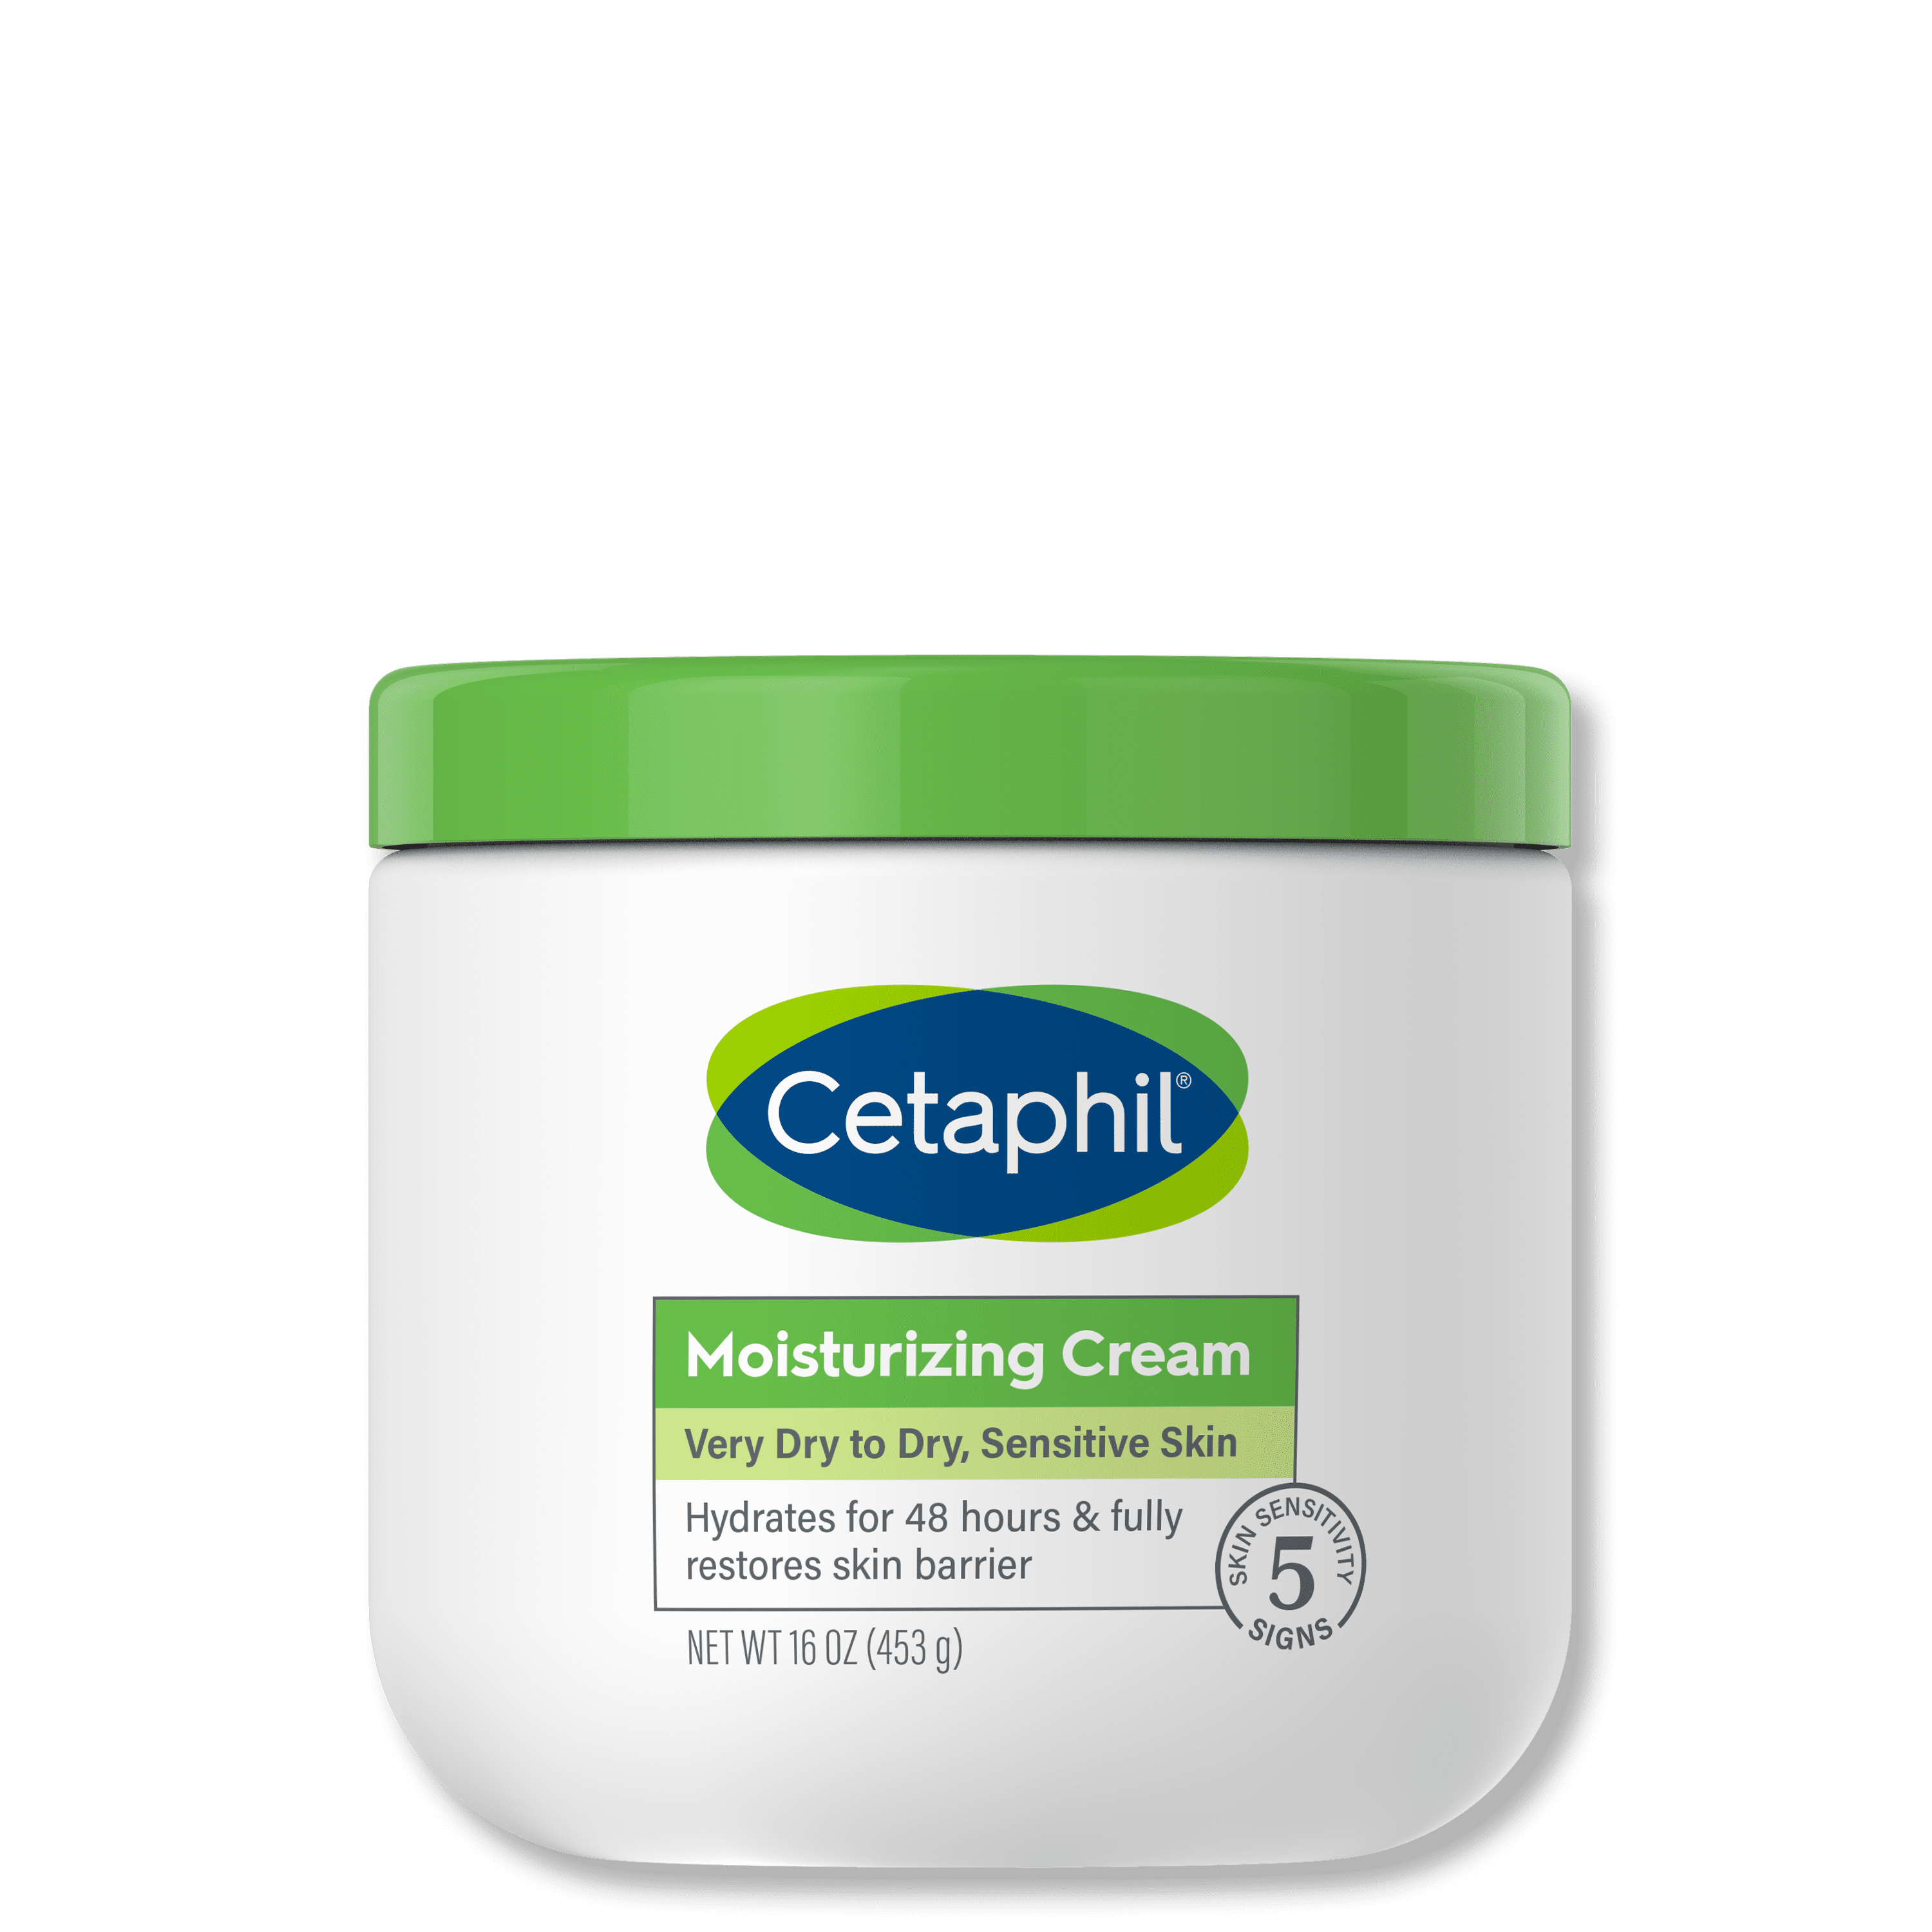 Body Moisturizer by CETAPHIL, Hydrating Moisturizing Cream for Dry to Very Dry, Sensitive Skin, 16 oz, Fragrance Free, Non-Comedogenic, Non-Greasy